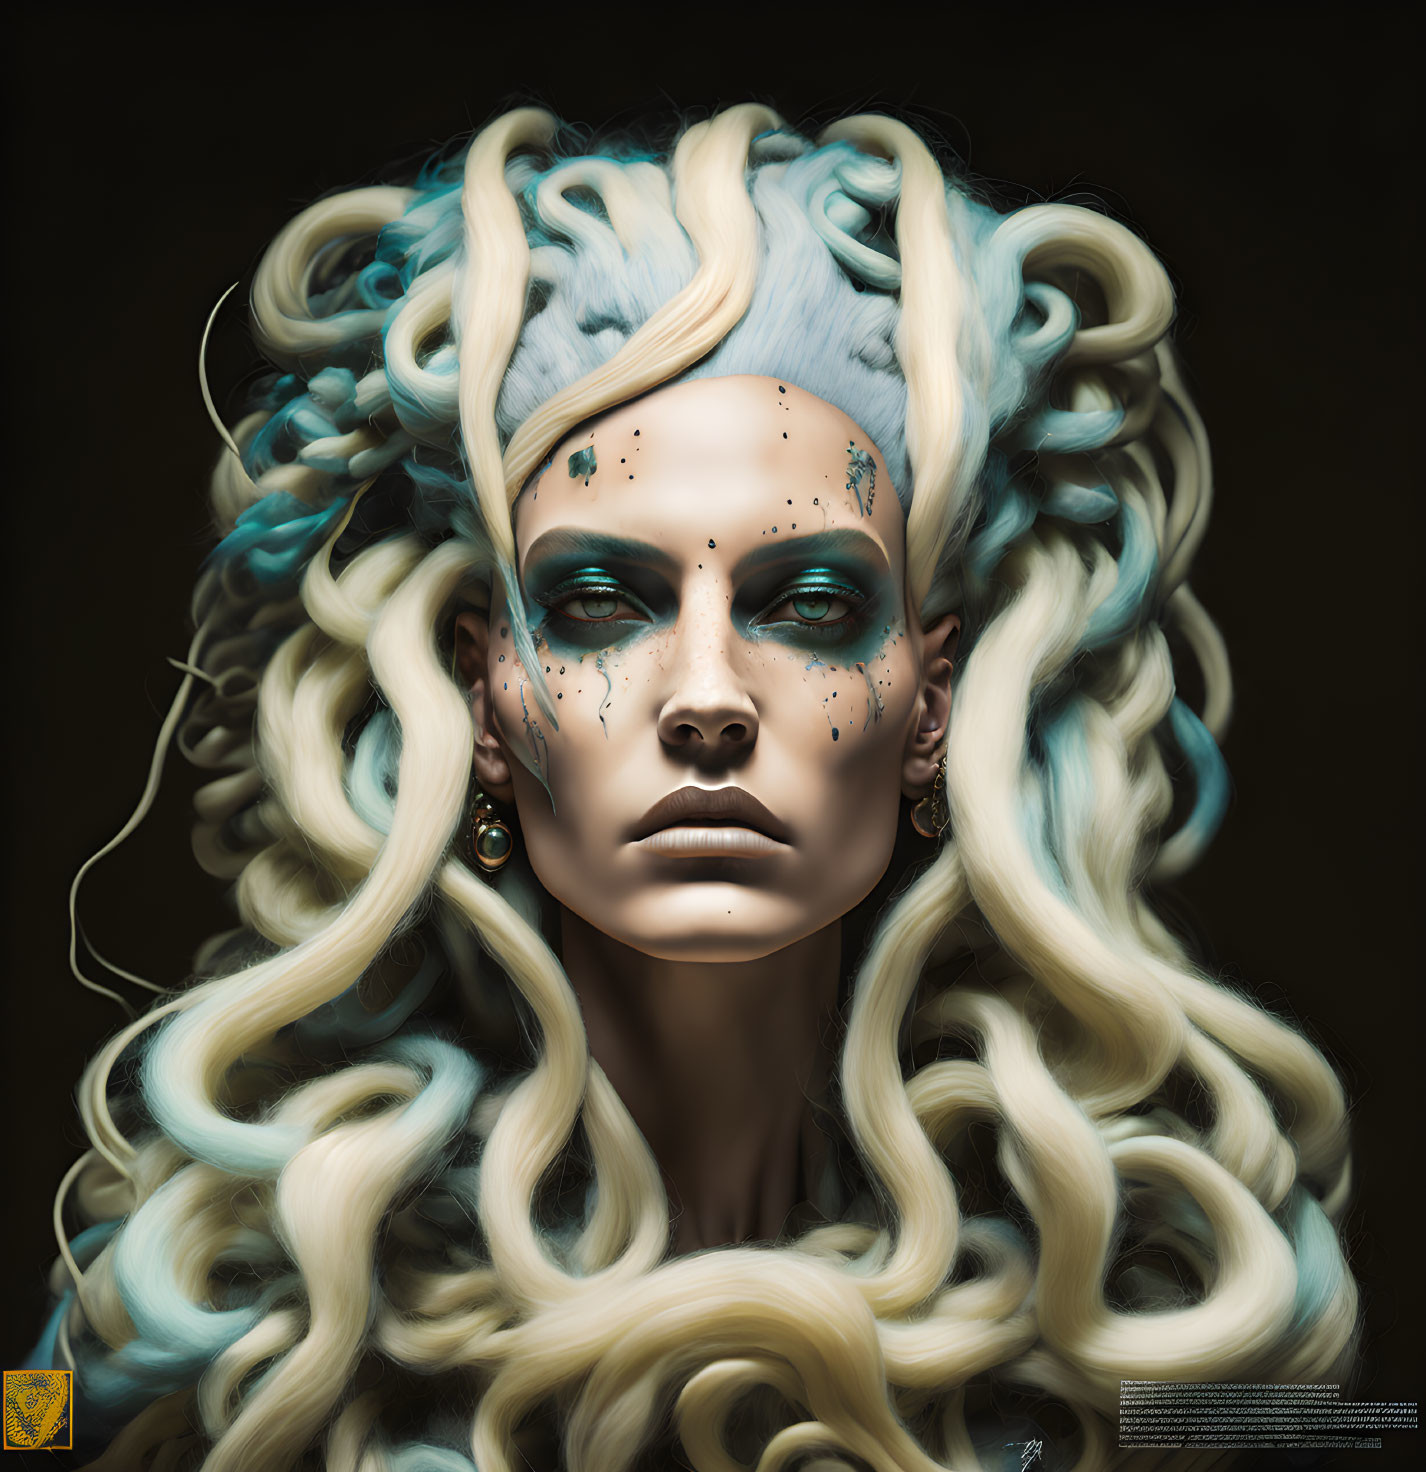 Digital portrait of female figure with pale blue skin and wavy white hair with dark speckles.